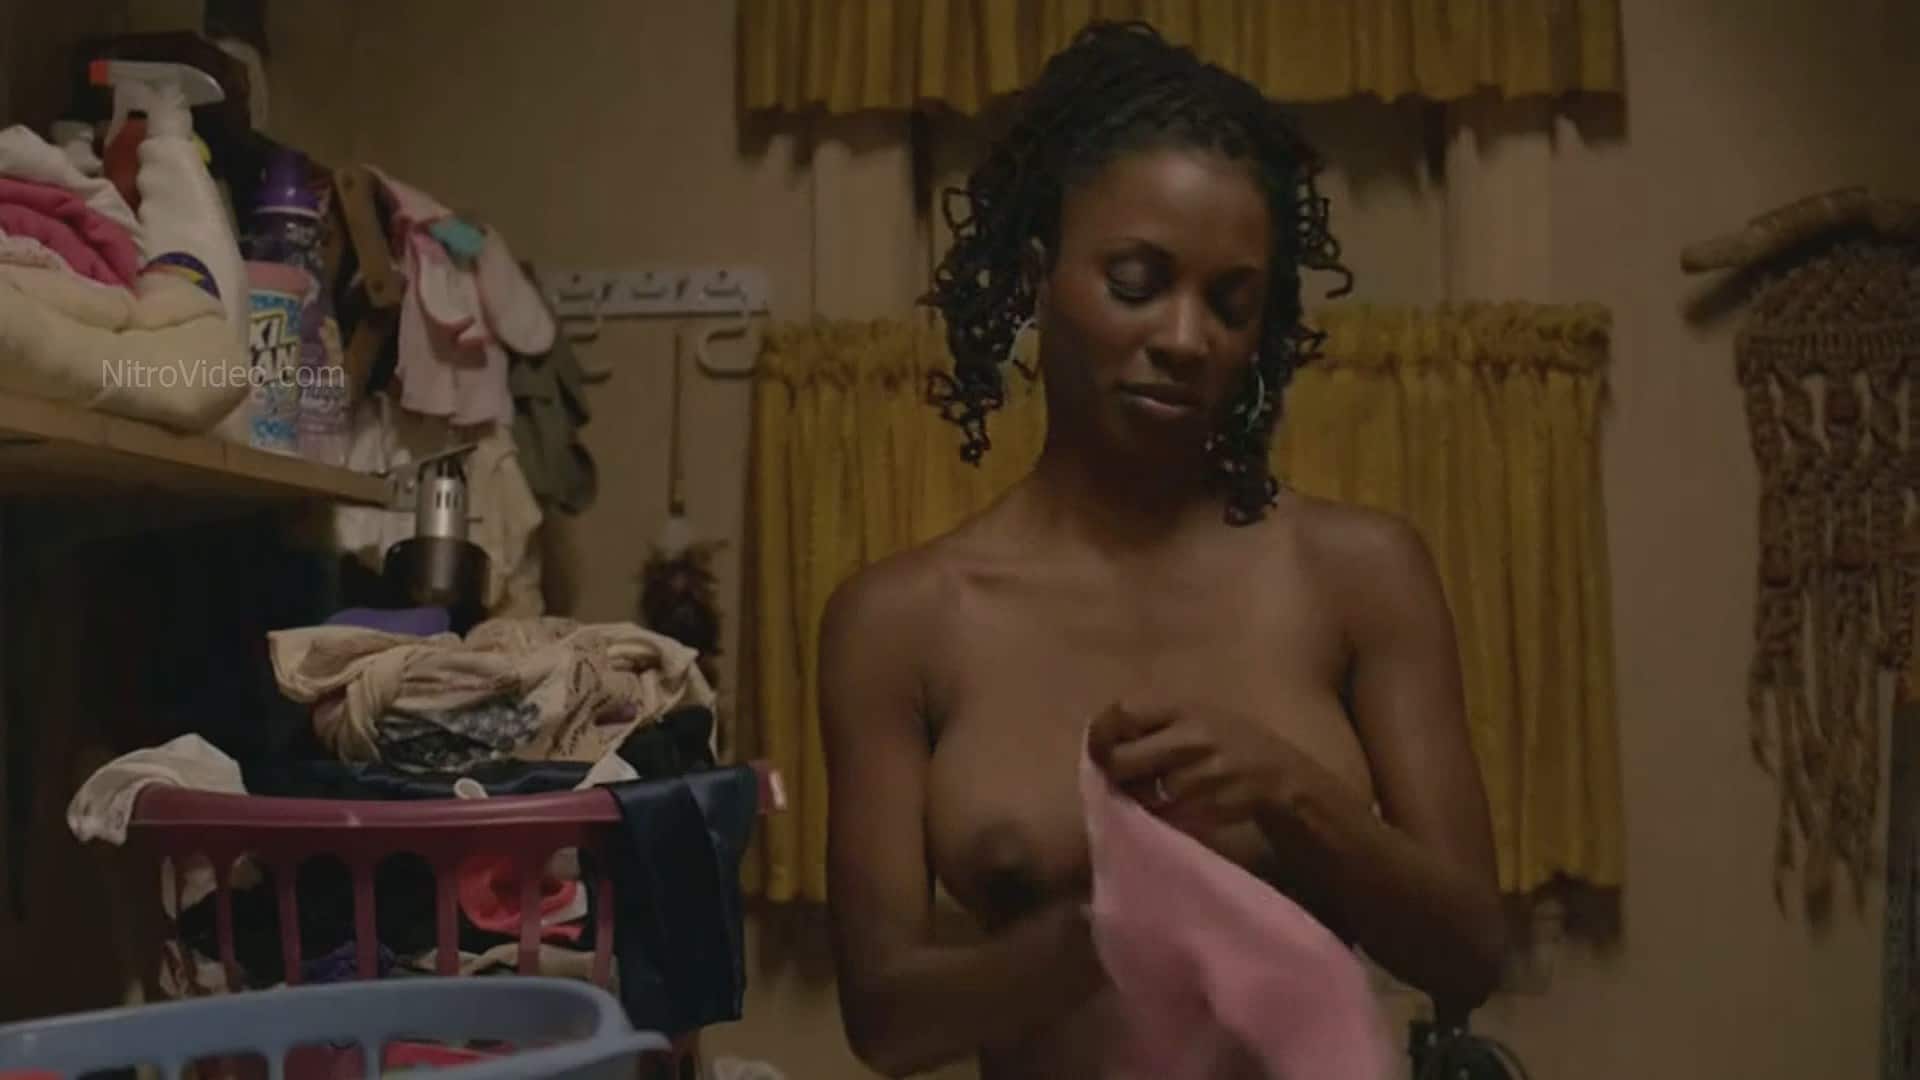 When the show first came out in 2011, Shanola Hampton’s character Vee was a...